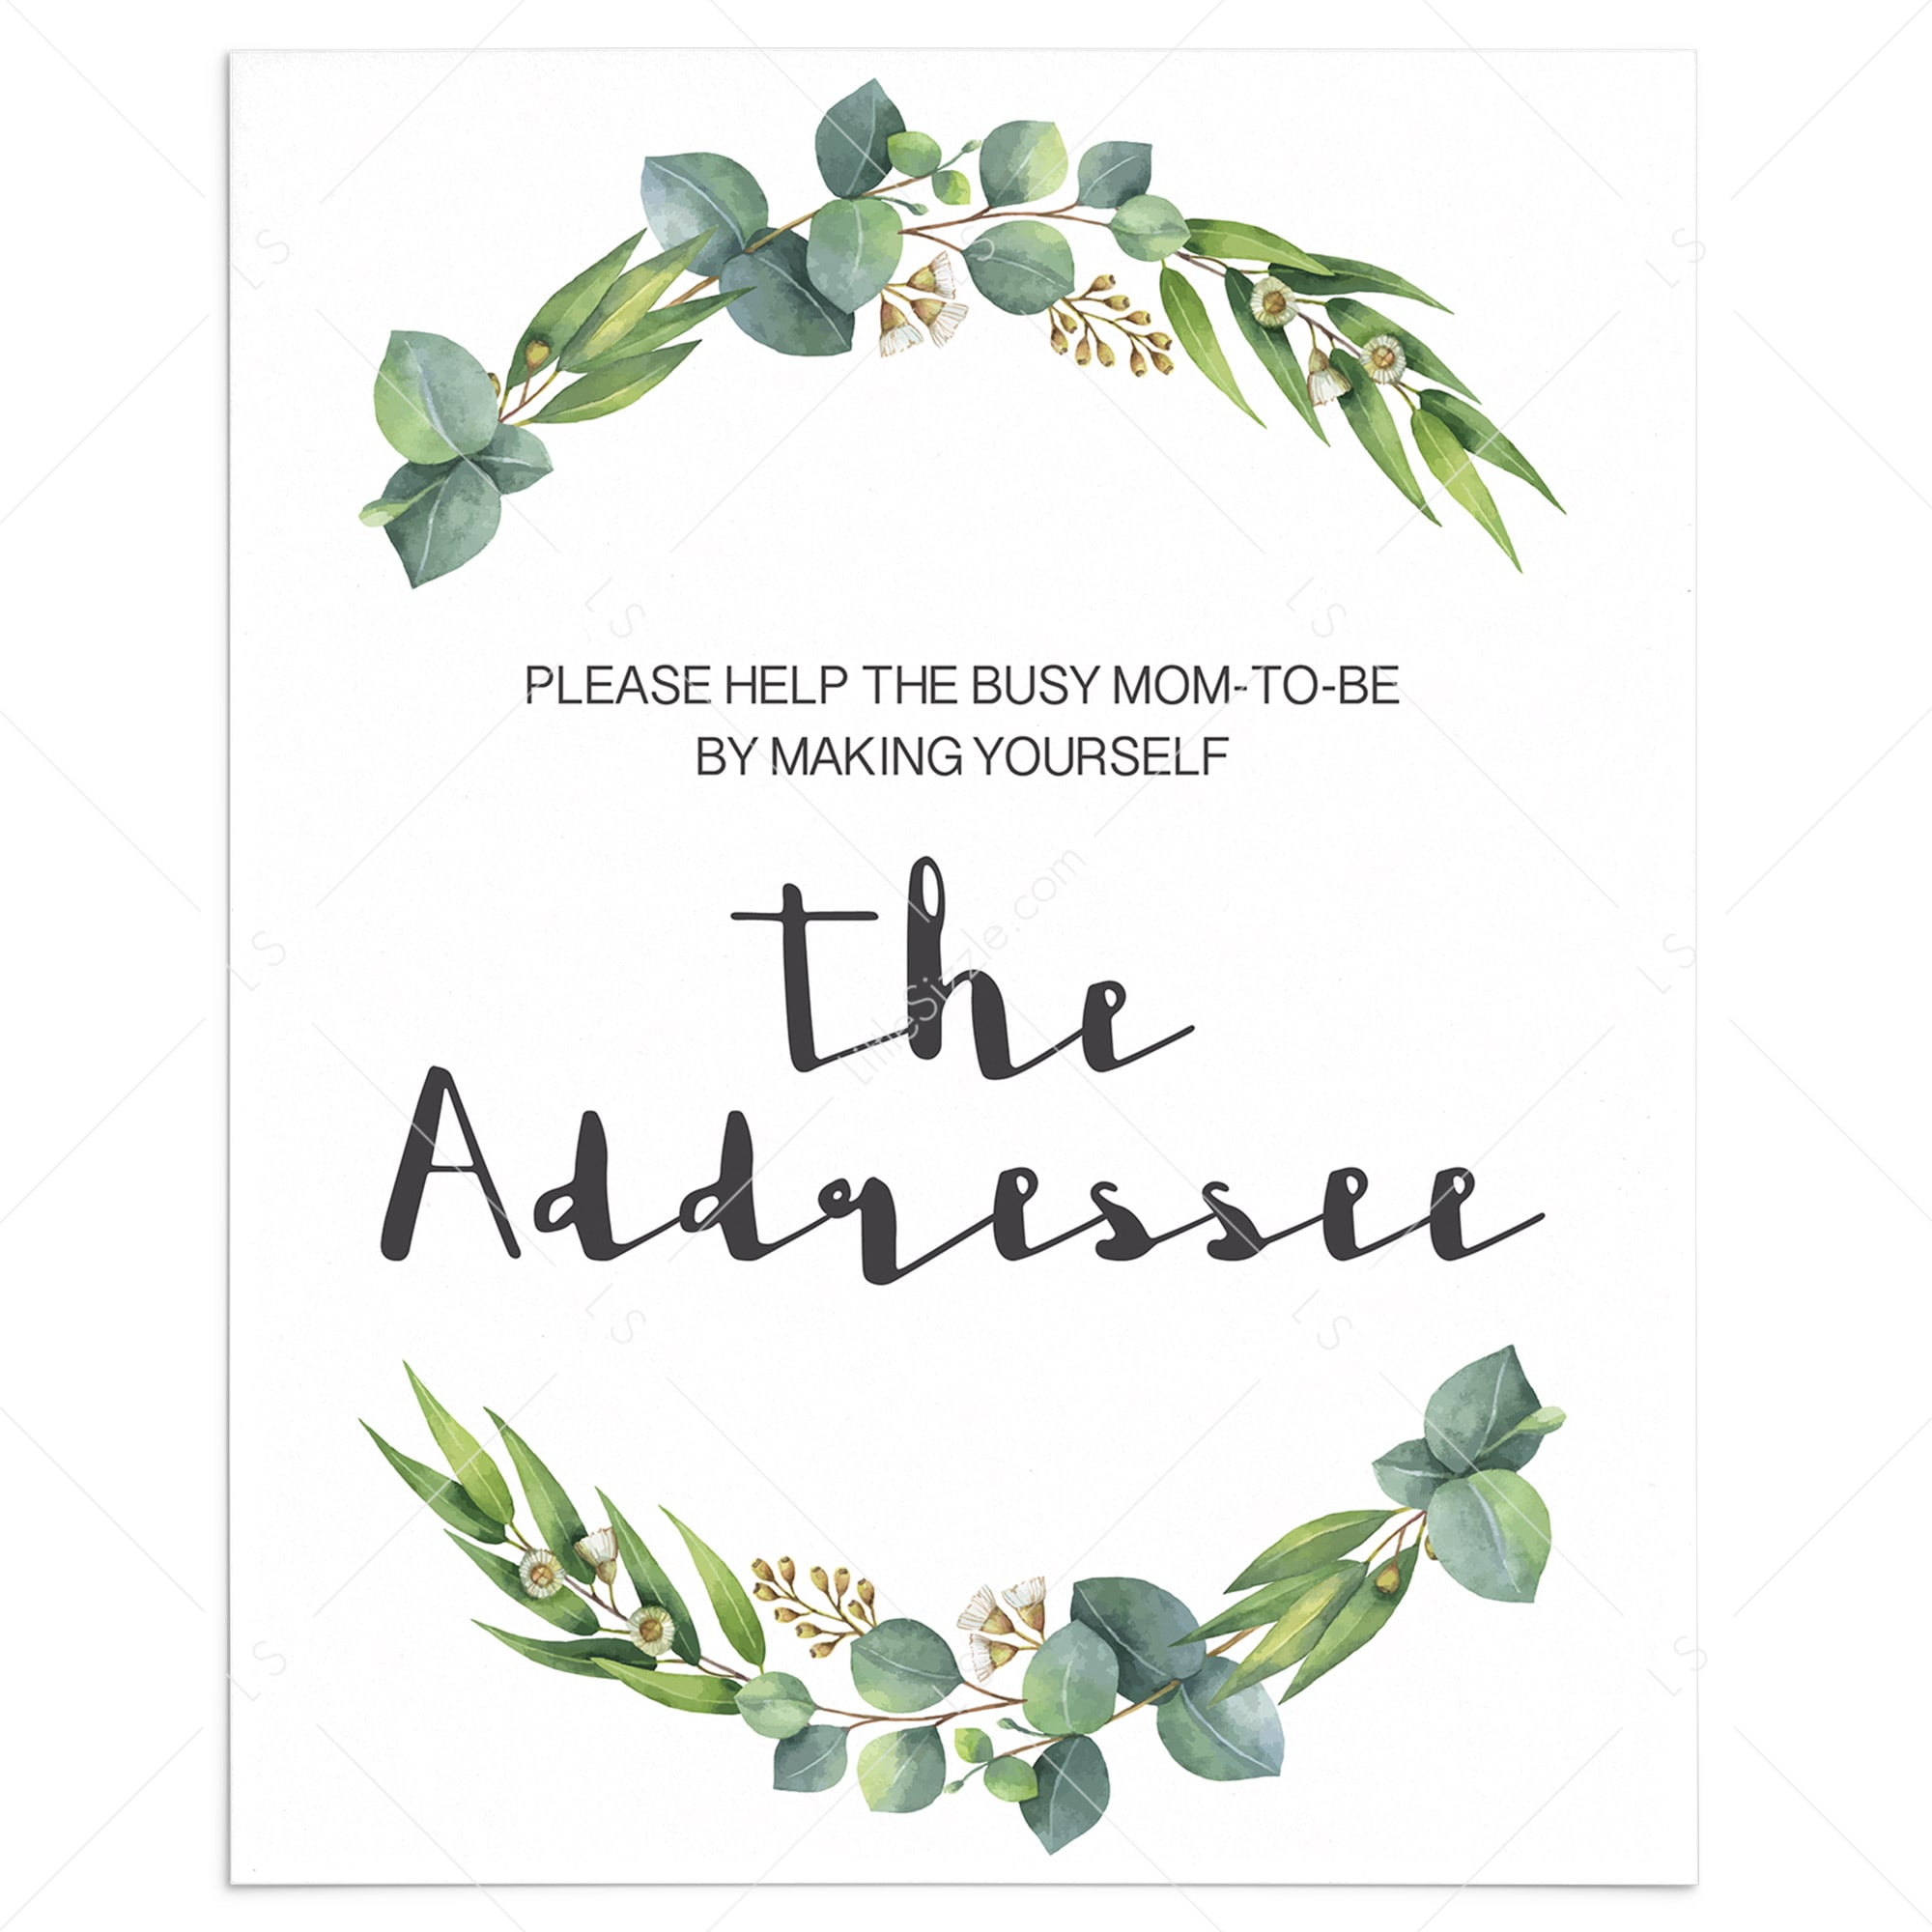 Printable baby shower address station sign by LittleSizzle